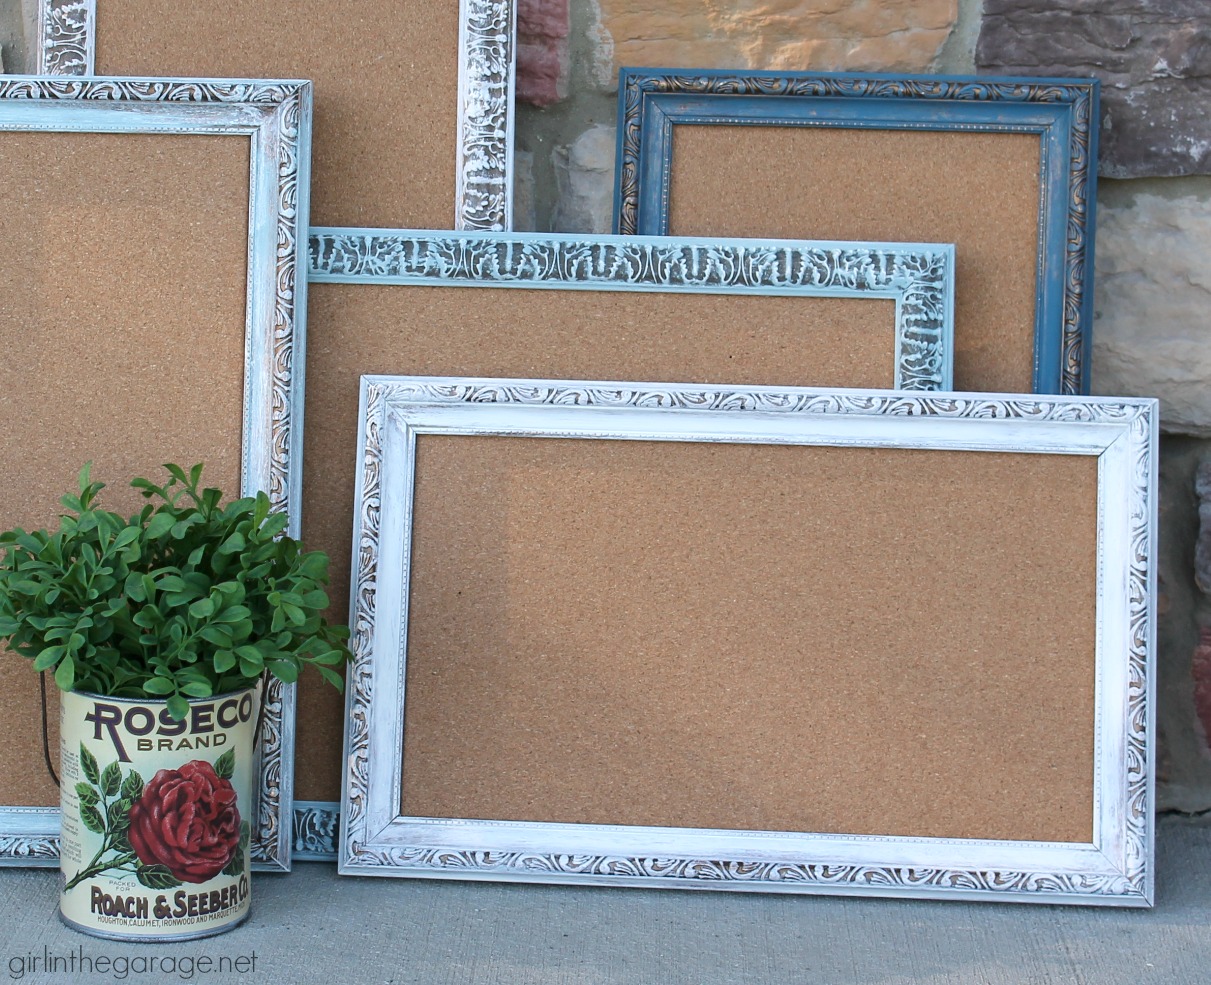 Thrifted Repurposed Art - DIY Memo Boards - Trash to Treasure Makeover - Girl in the Garage